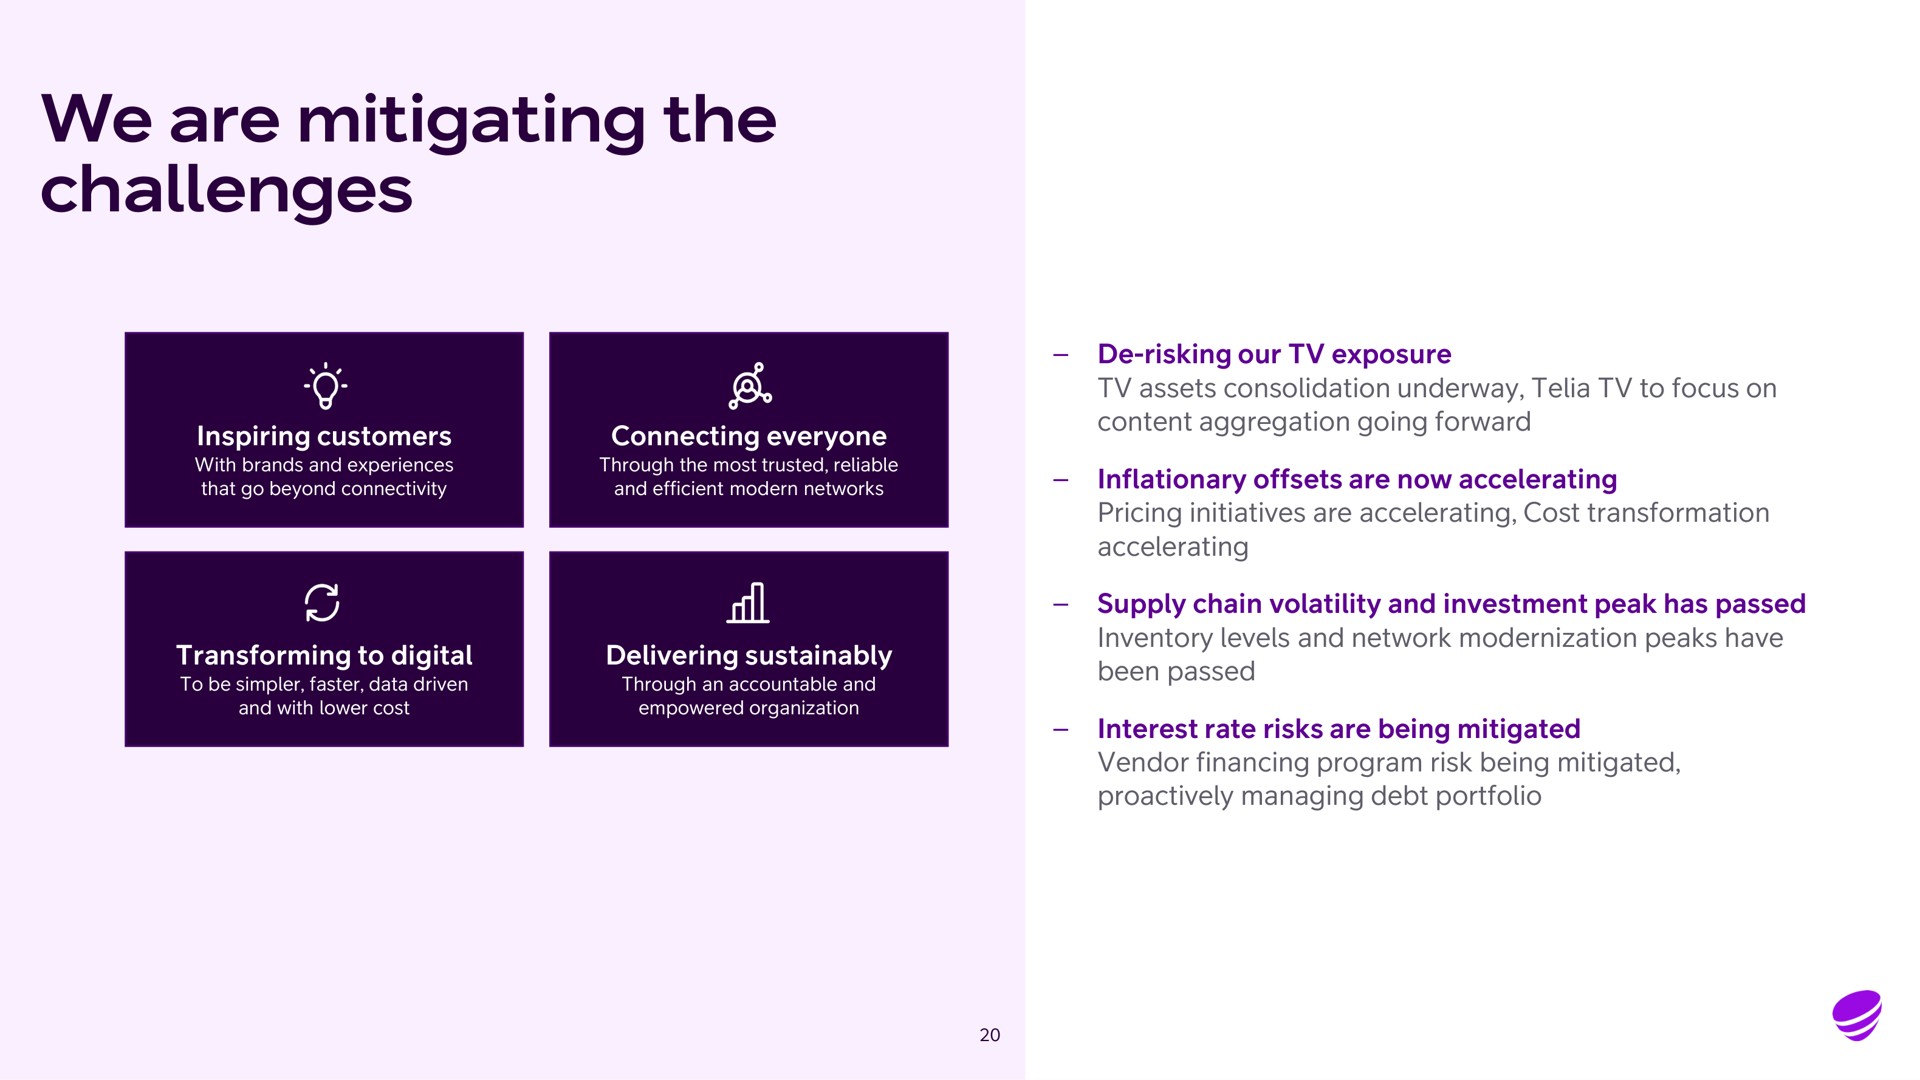 we are mitigating the challenges ill | Telia Company